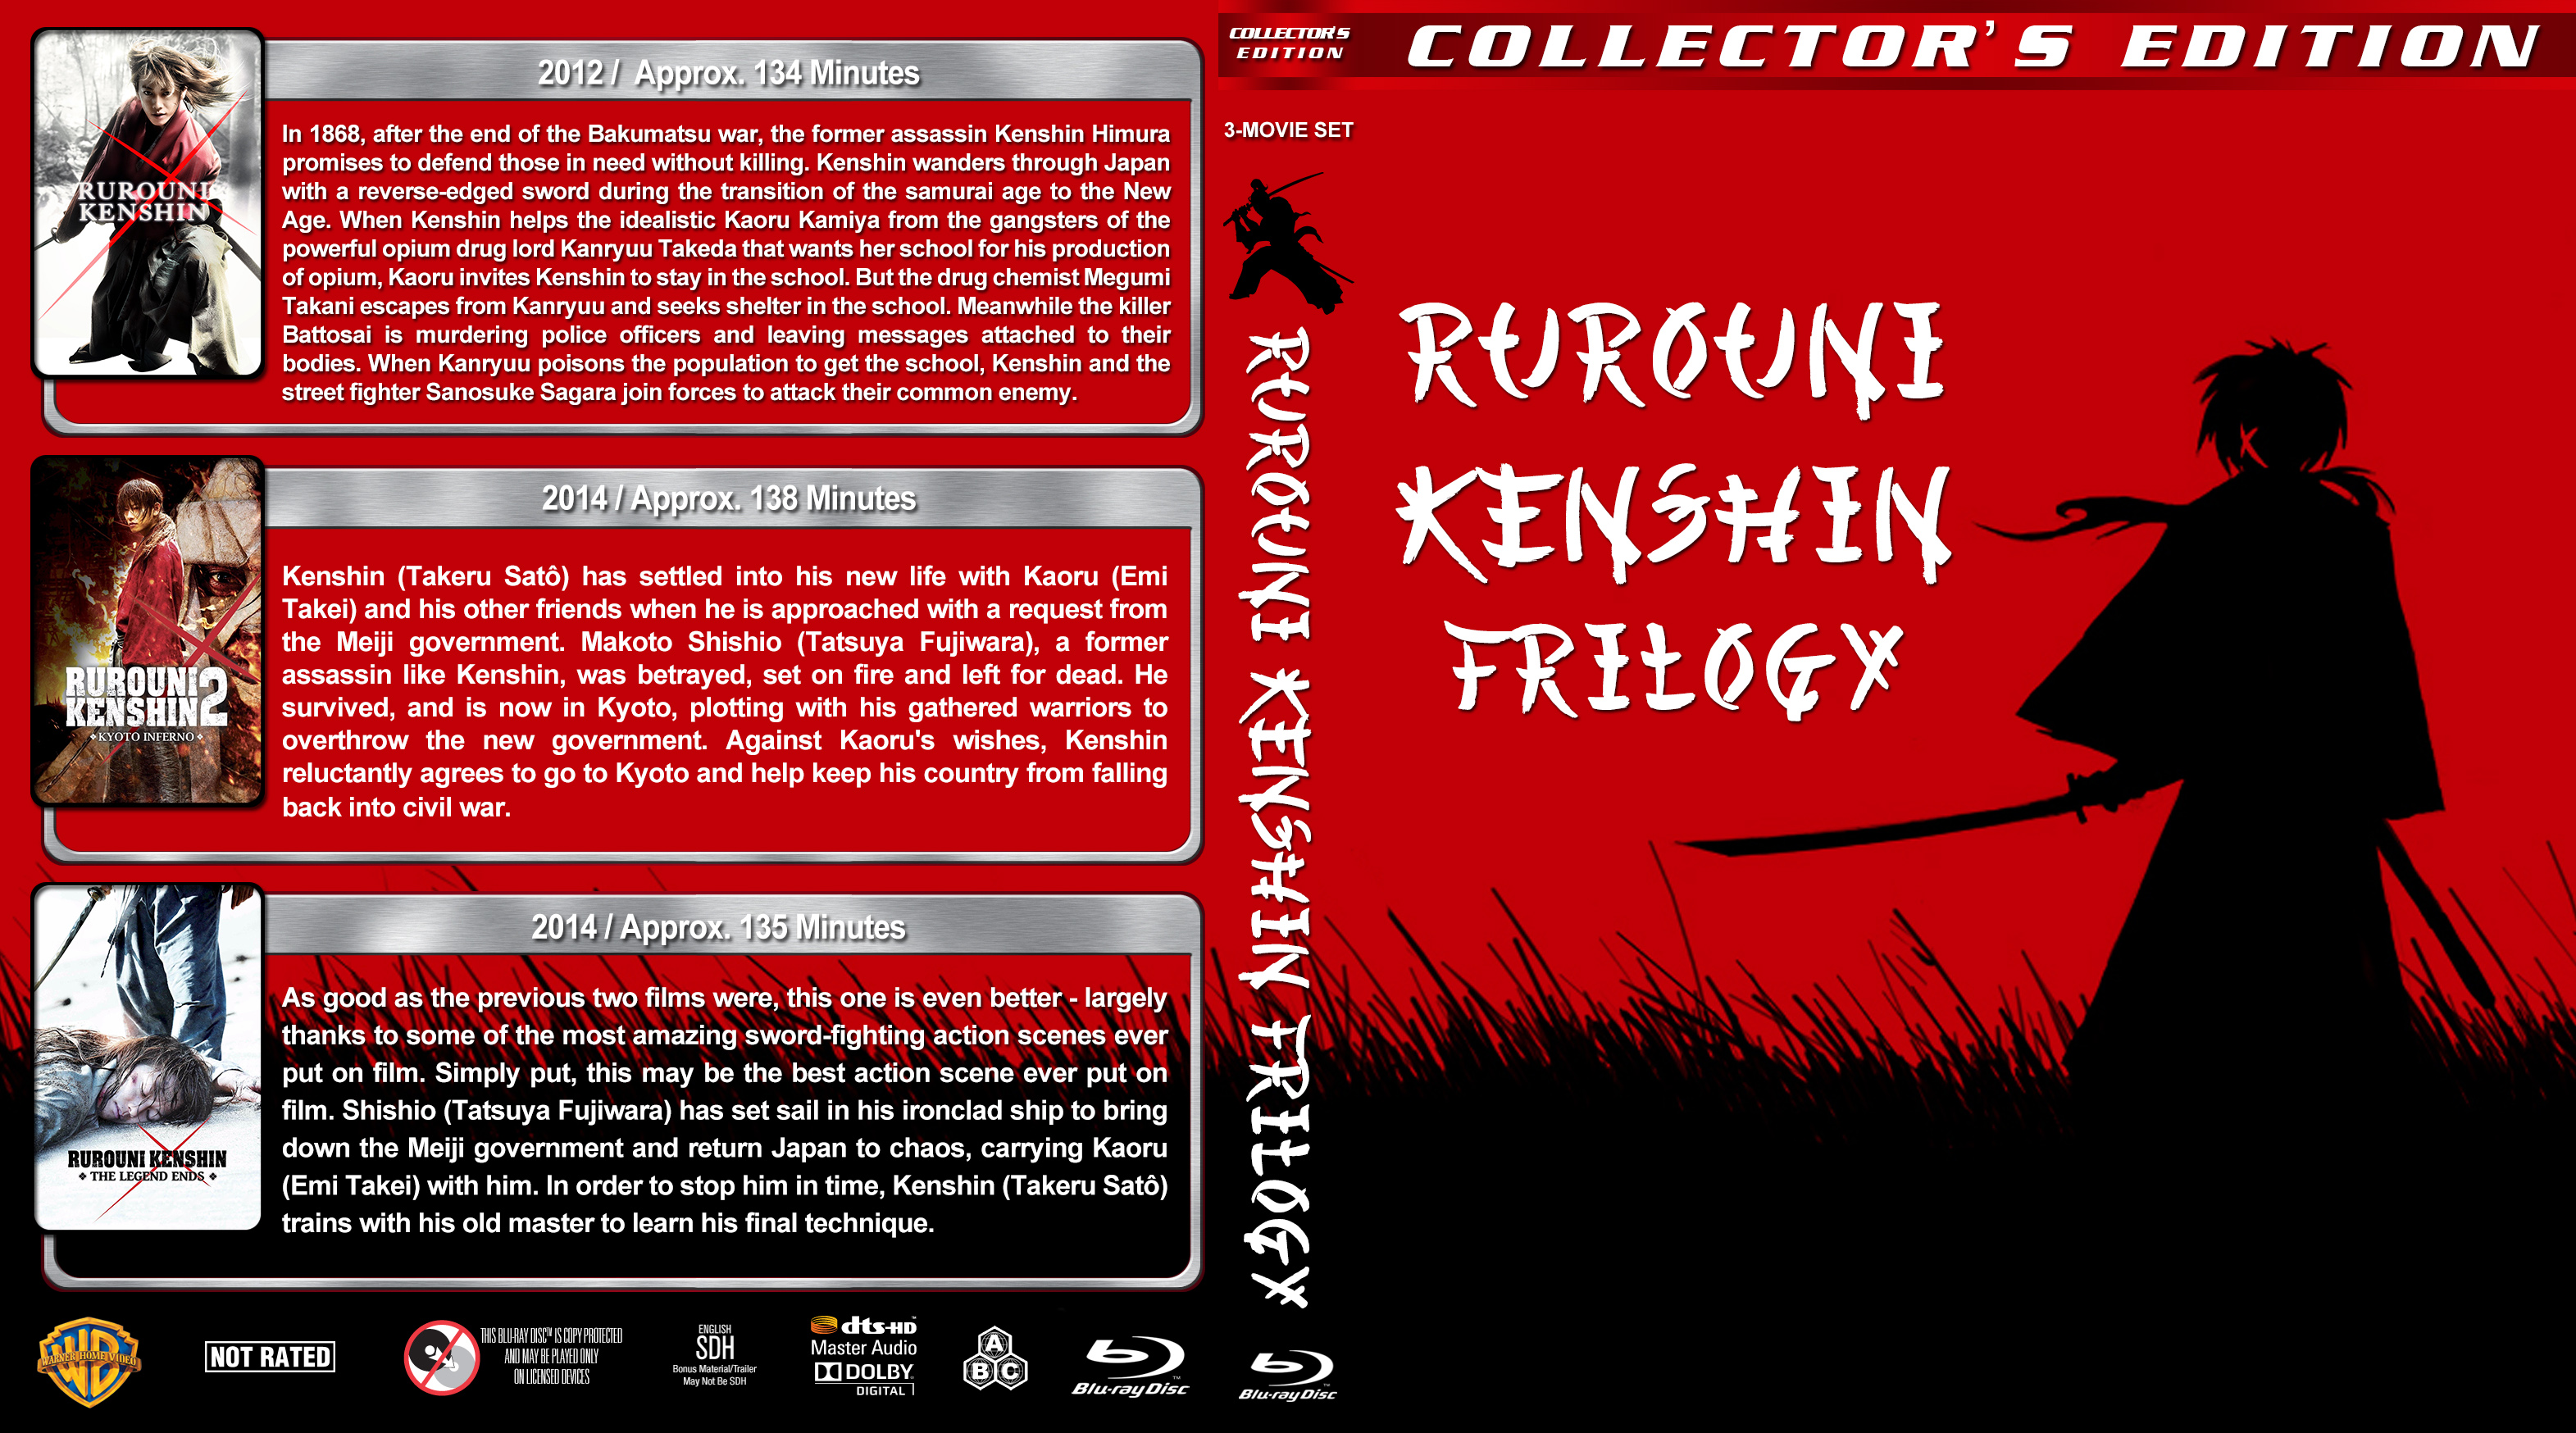 Rurouni Kenshin Trilogy Br Version 2 Dvd Covers Cover Century Over 500 000 Album Art Covers For Free